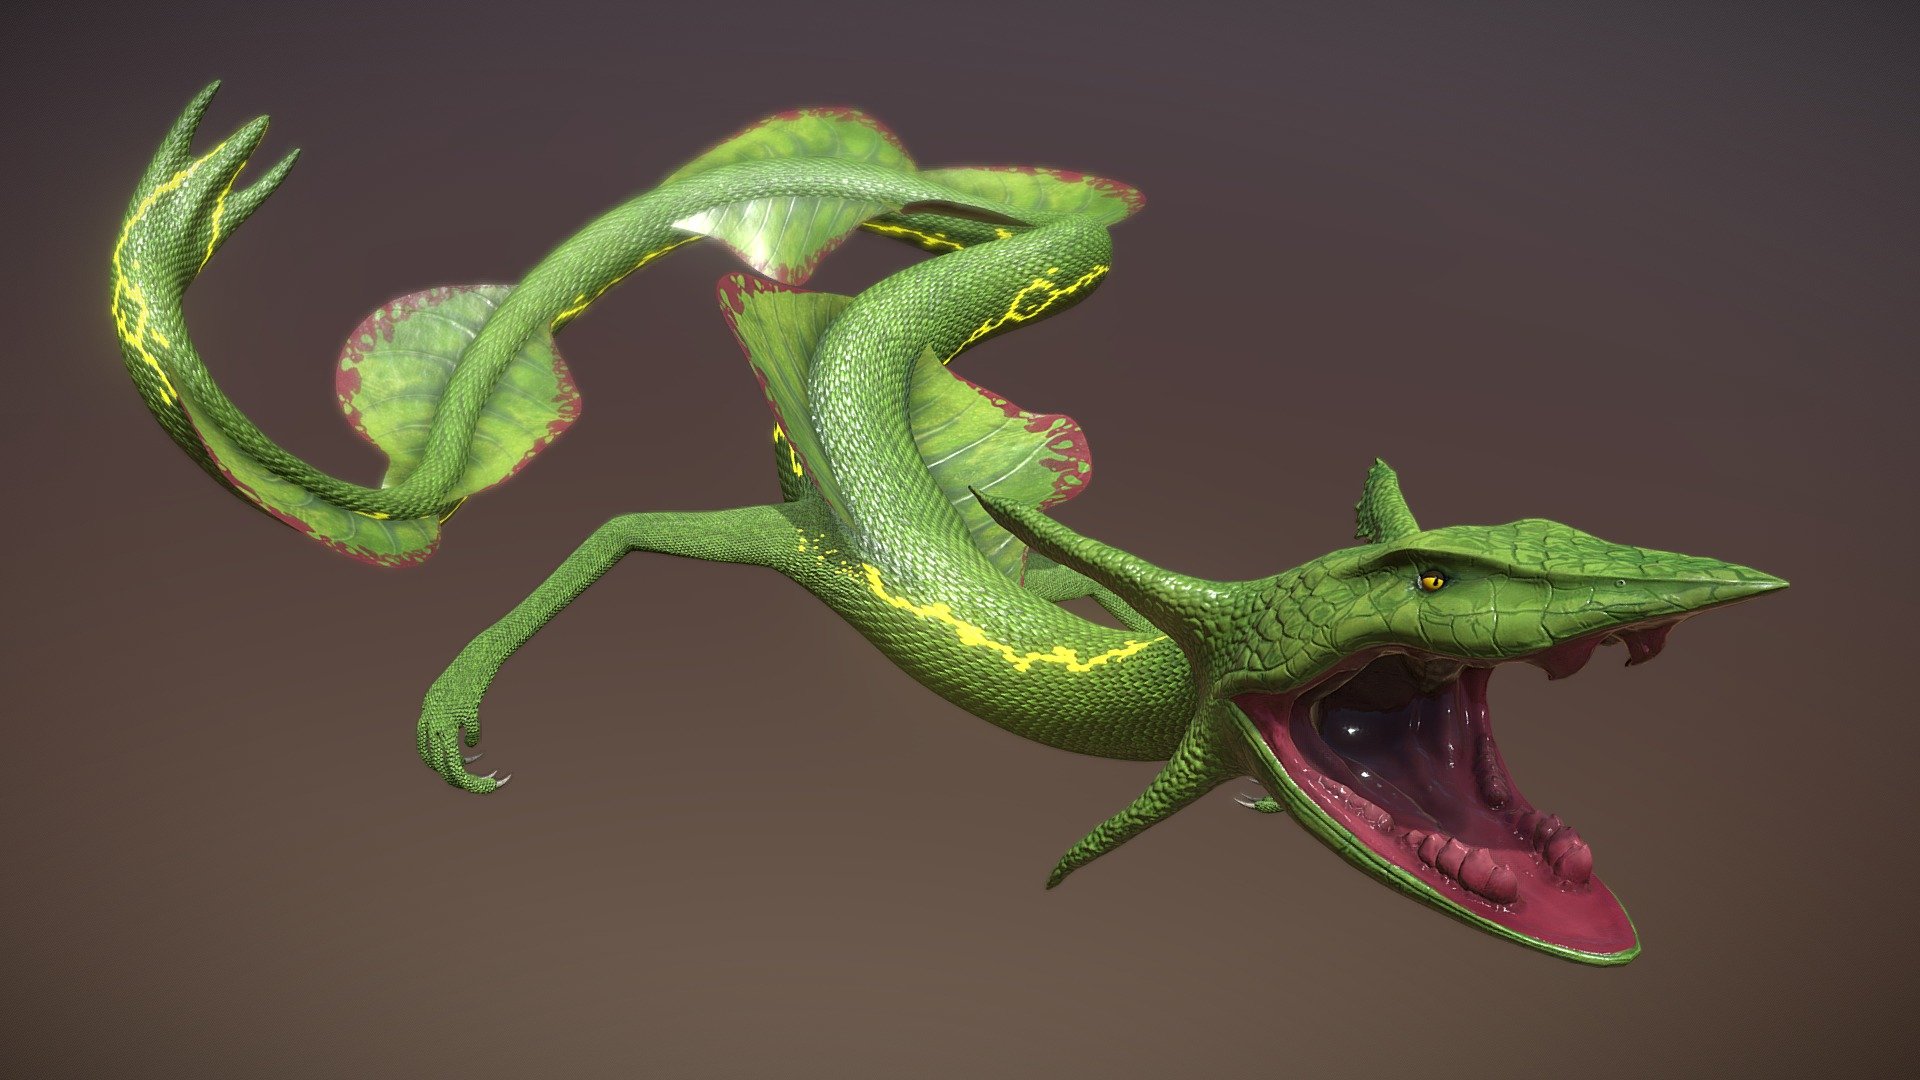 Here's the sky high Pokemon Rayquaza, another take on @arvalis &lsquo;s incredible realistic Pokemon series. This one really pushed me to try some things I haven't done before and I had a ton of fun making it! - Realistic Rayquaza - 3D model by Chase Morello (@ChaosAnimations) 3d model